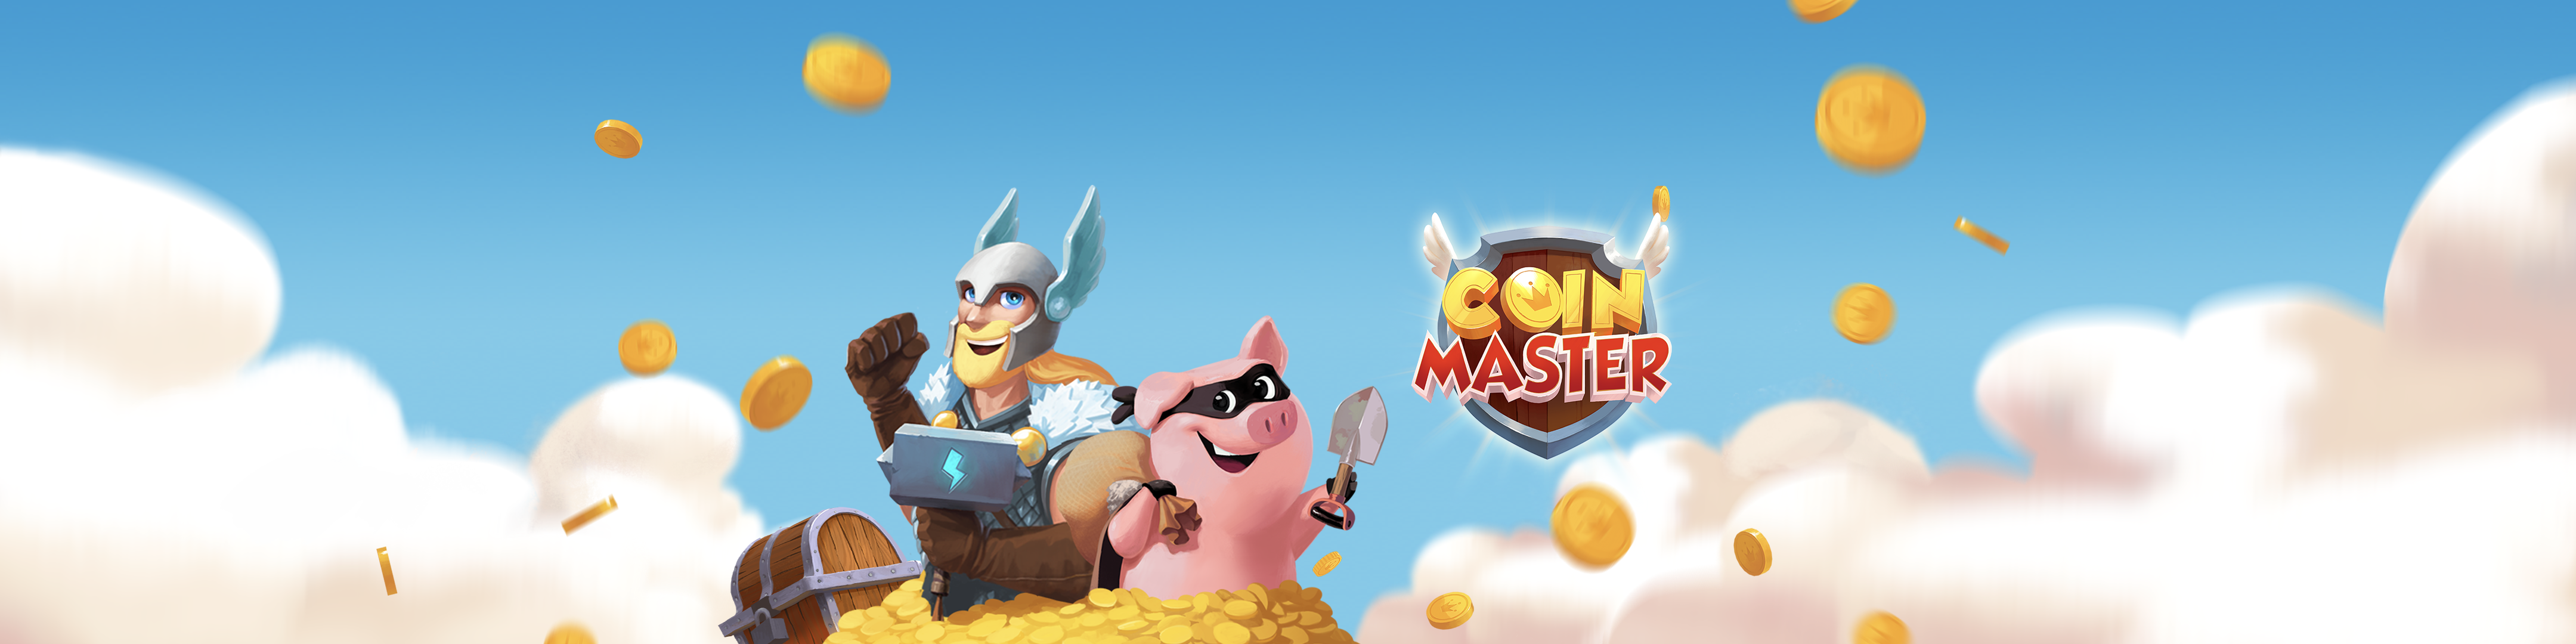 Coin master play store chess